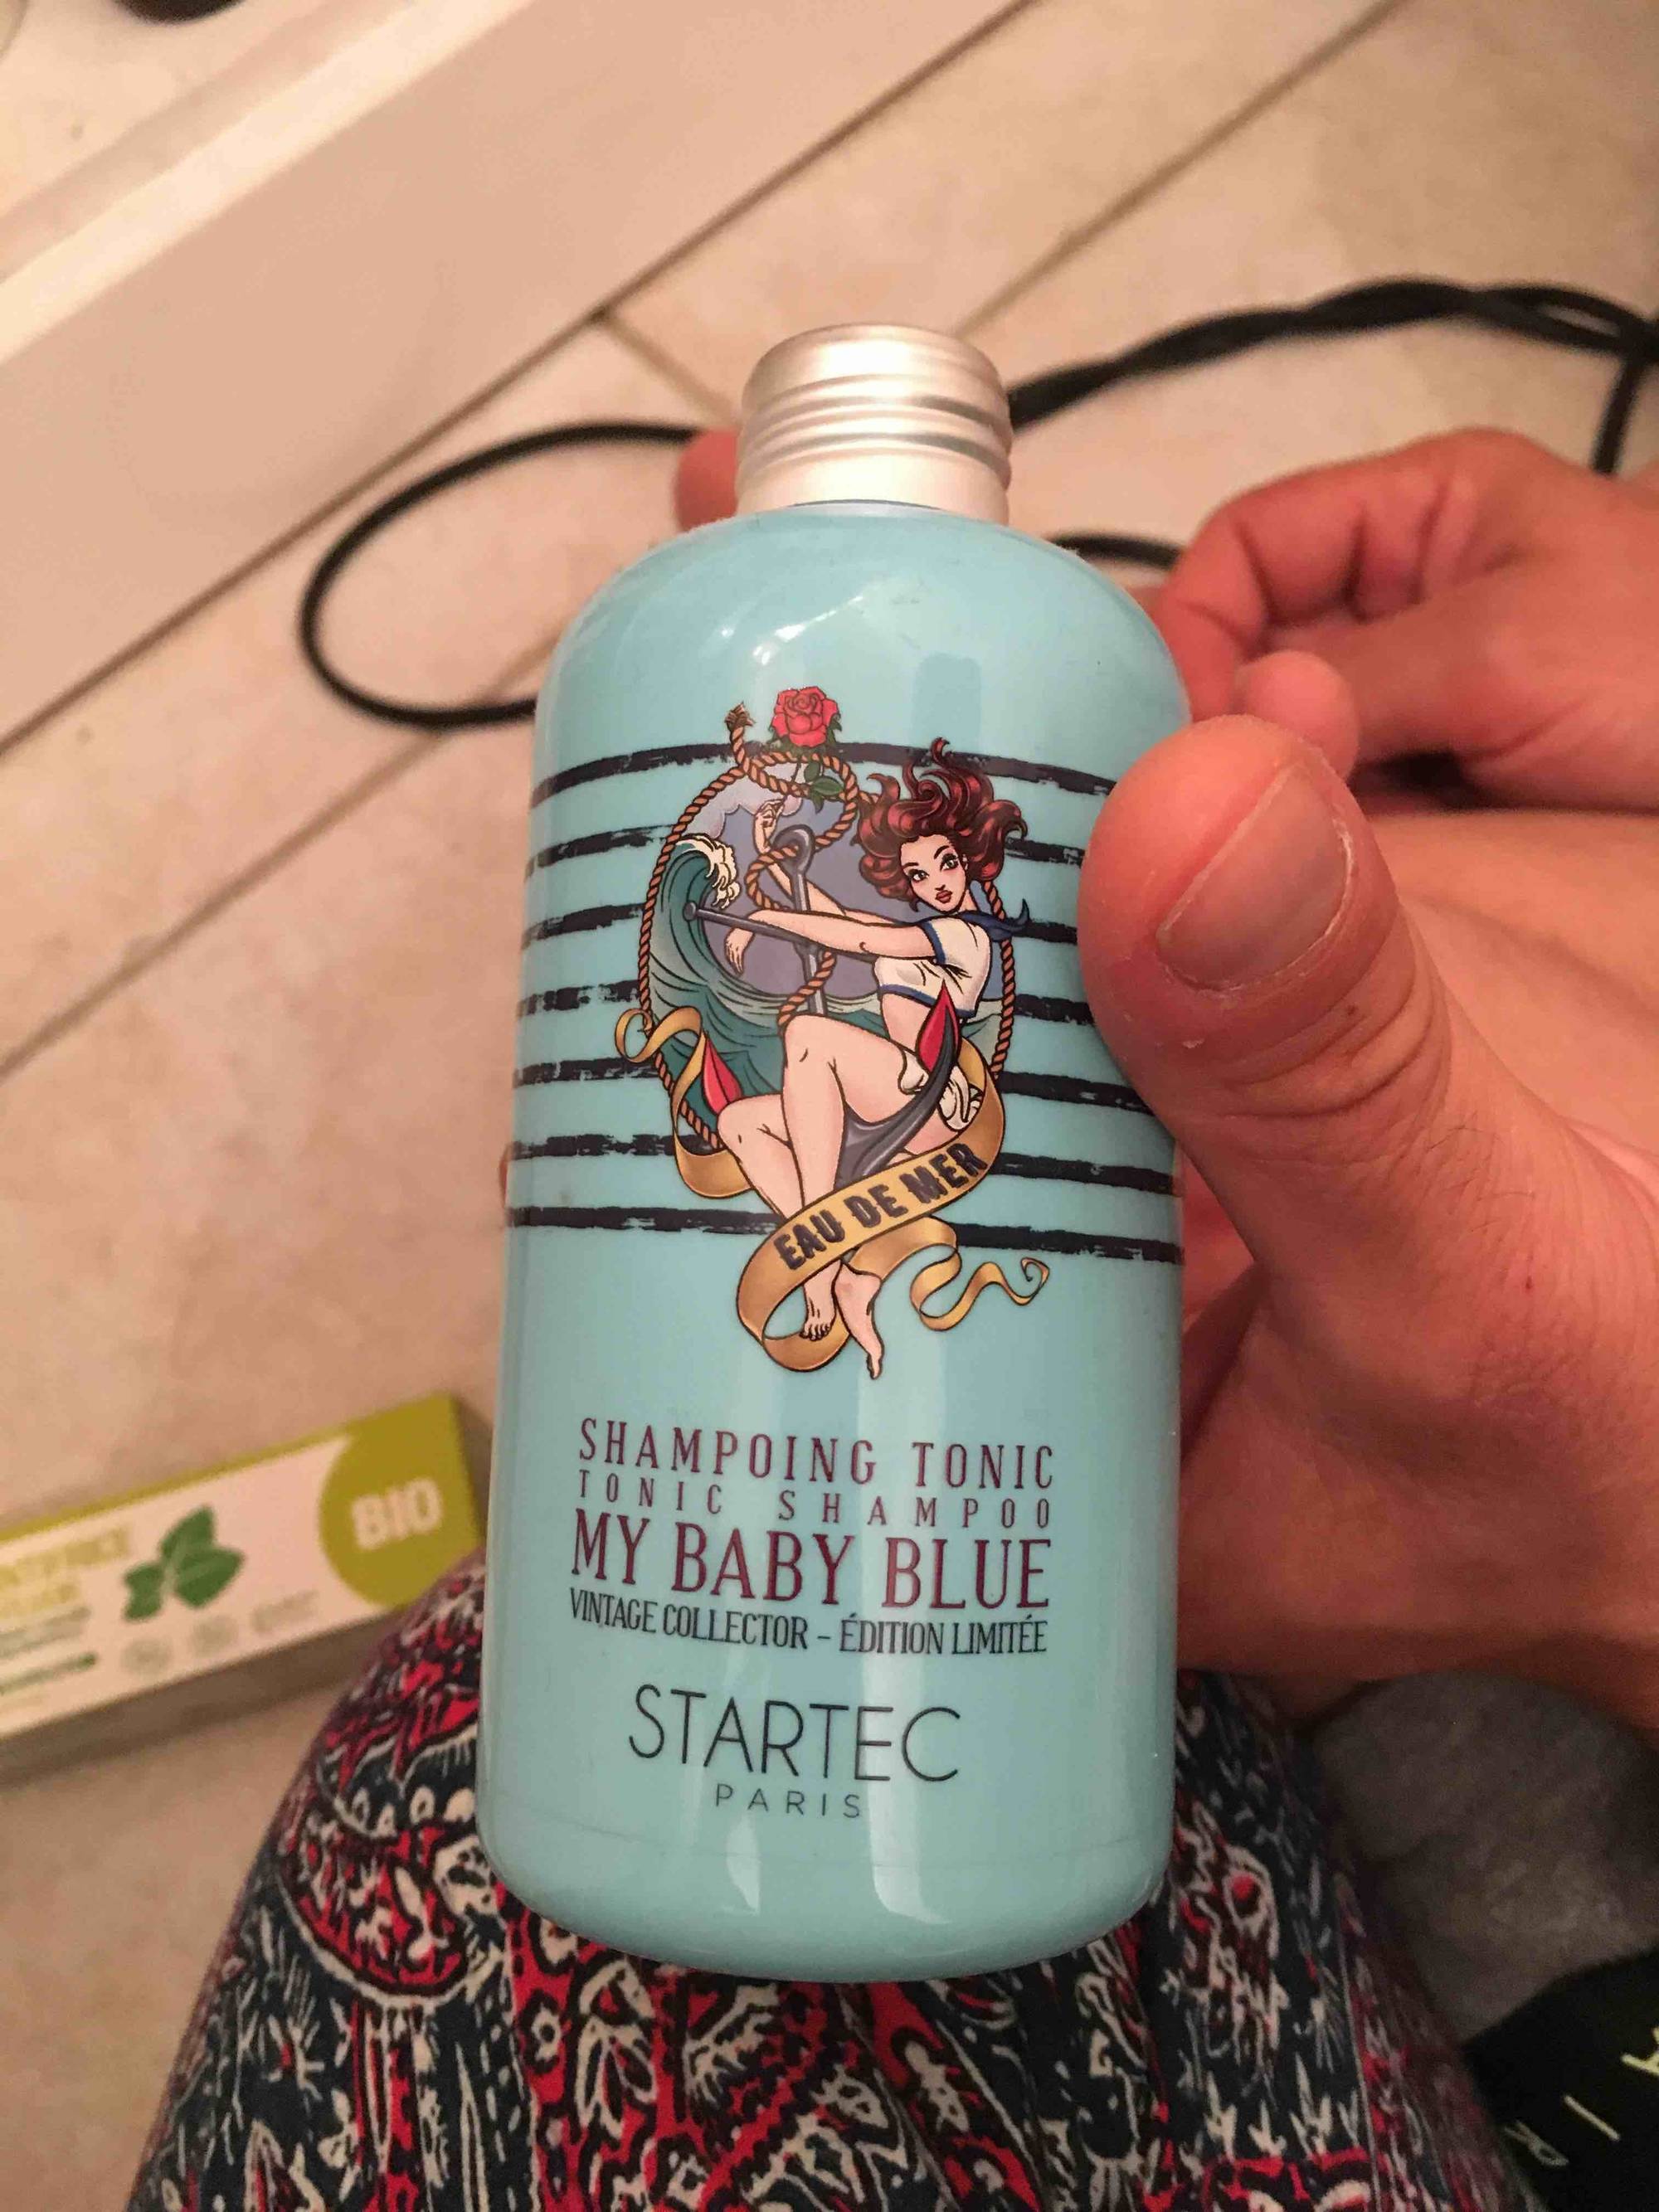 STARTEC - My baby blue - Shampoing tonic